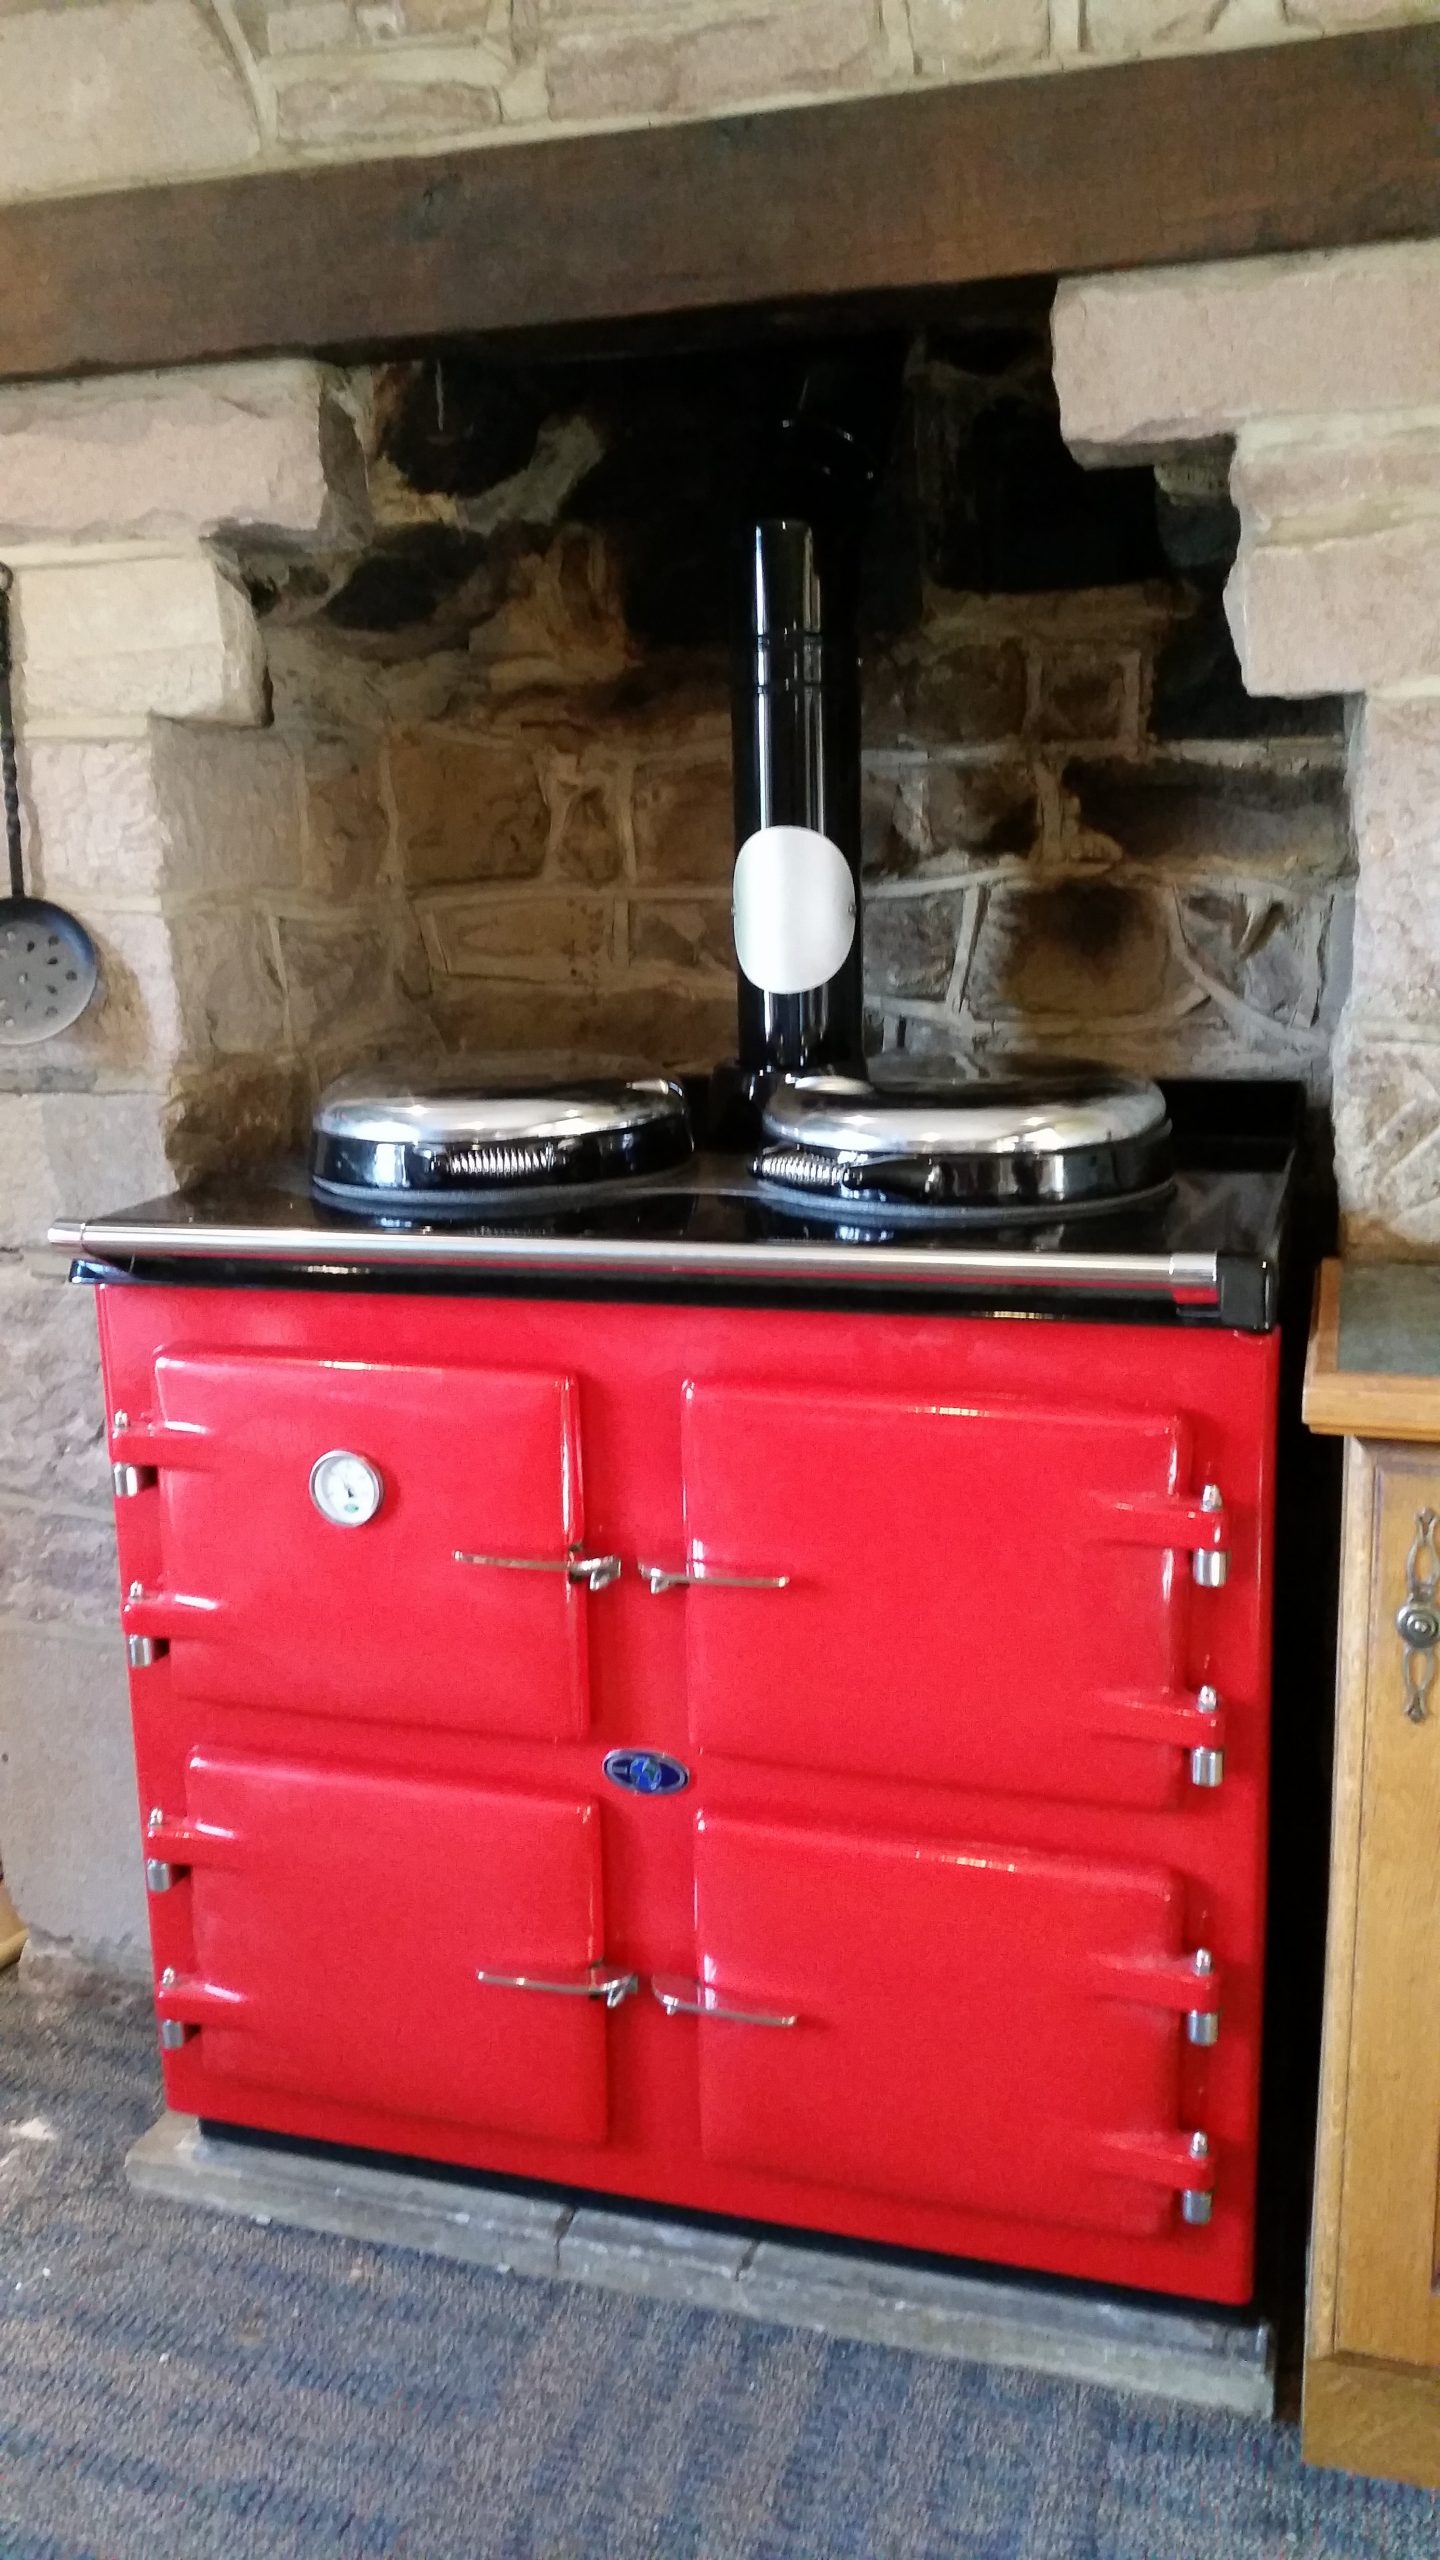 3 oven AGA cooker Red.